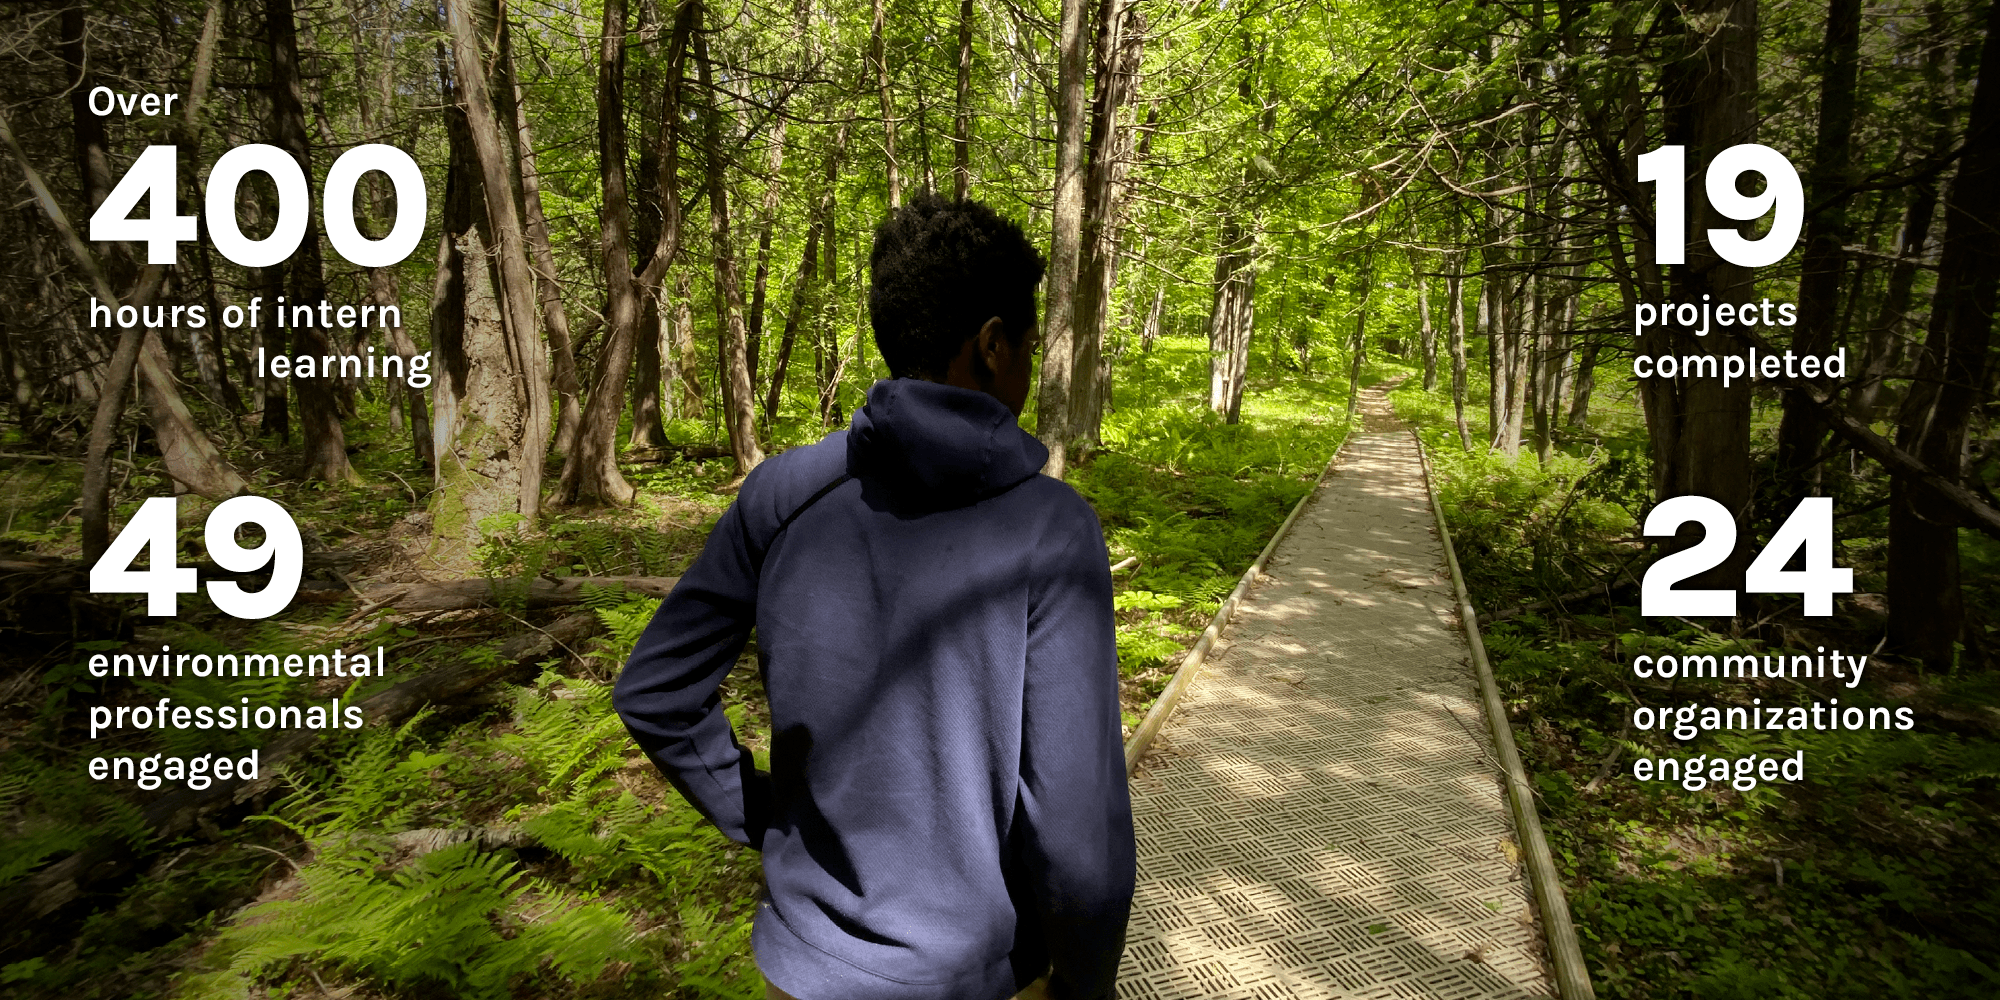 A Northside Safety NET intern walking in the woods with data about the program overlaid on the image.